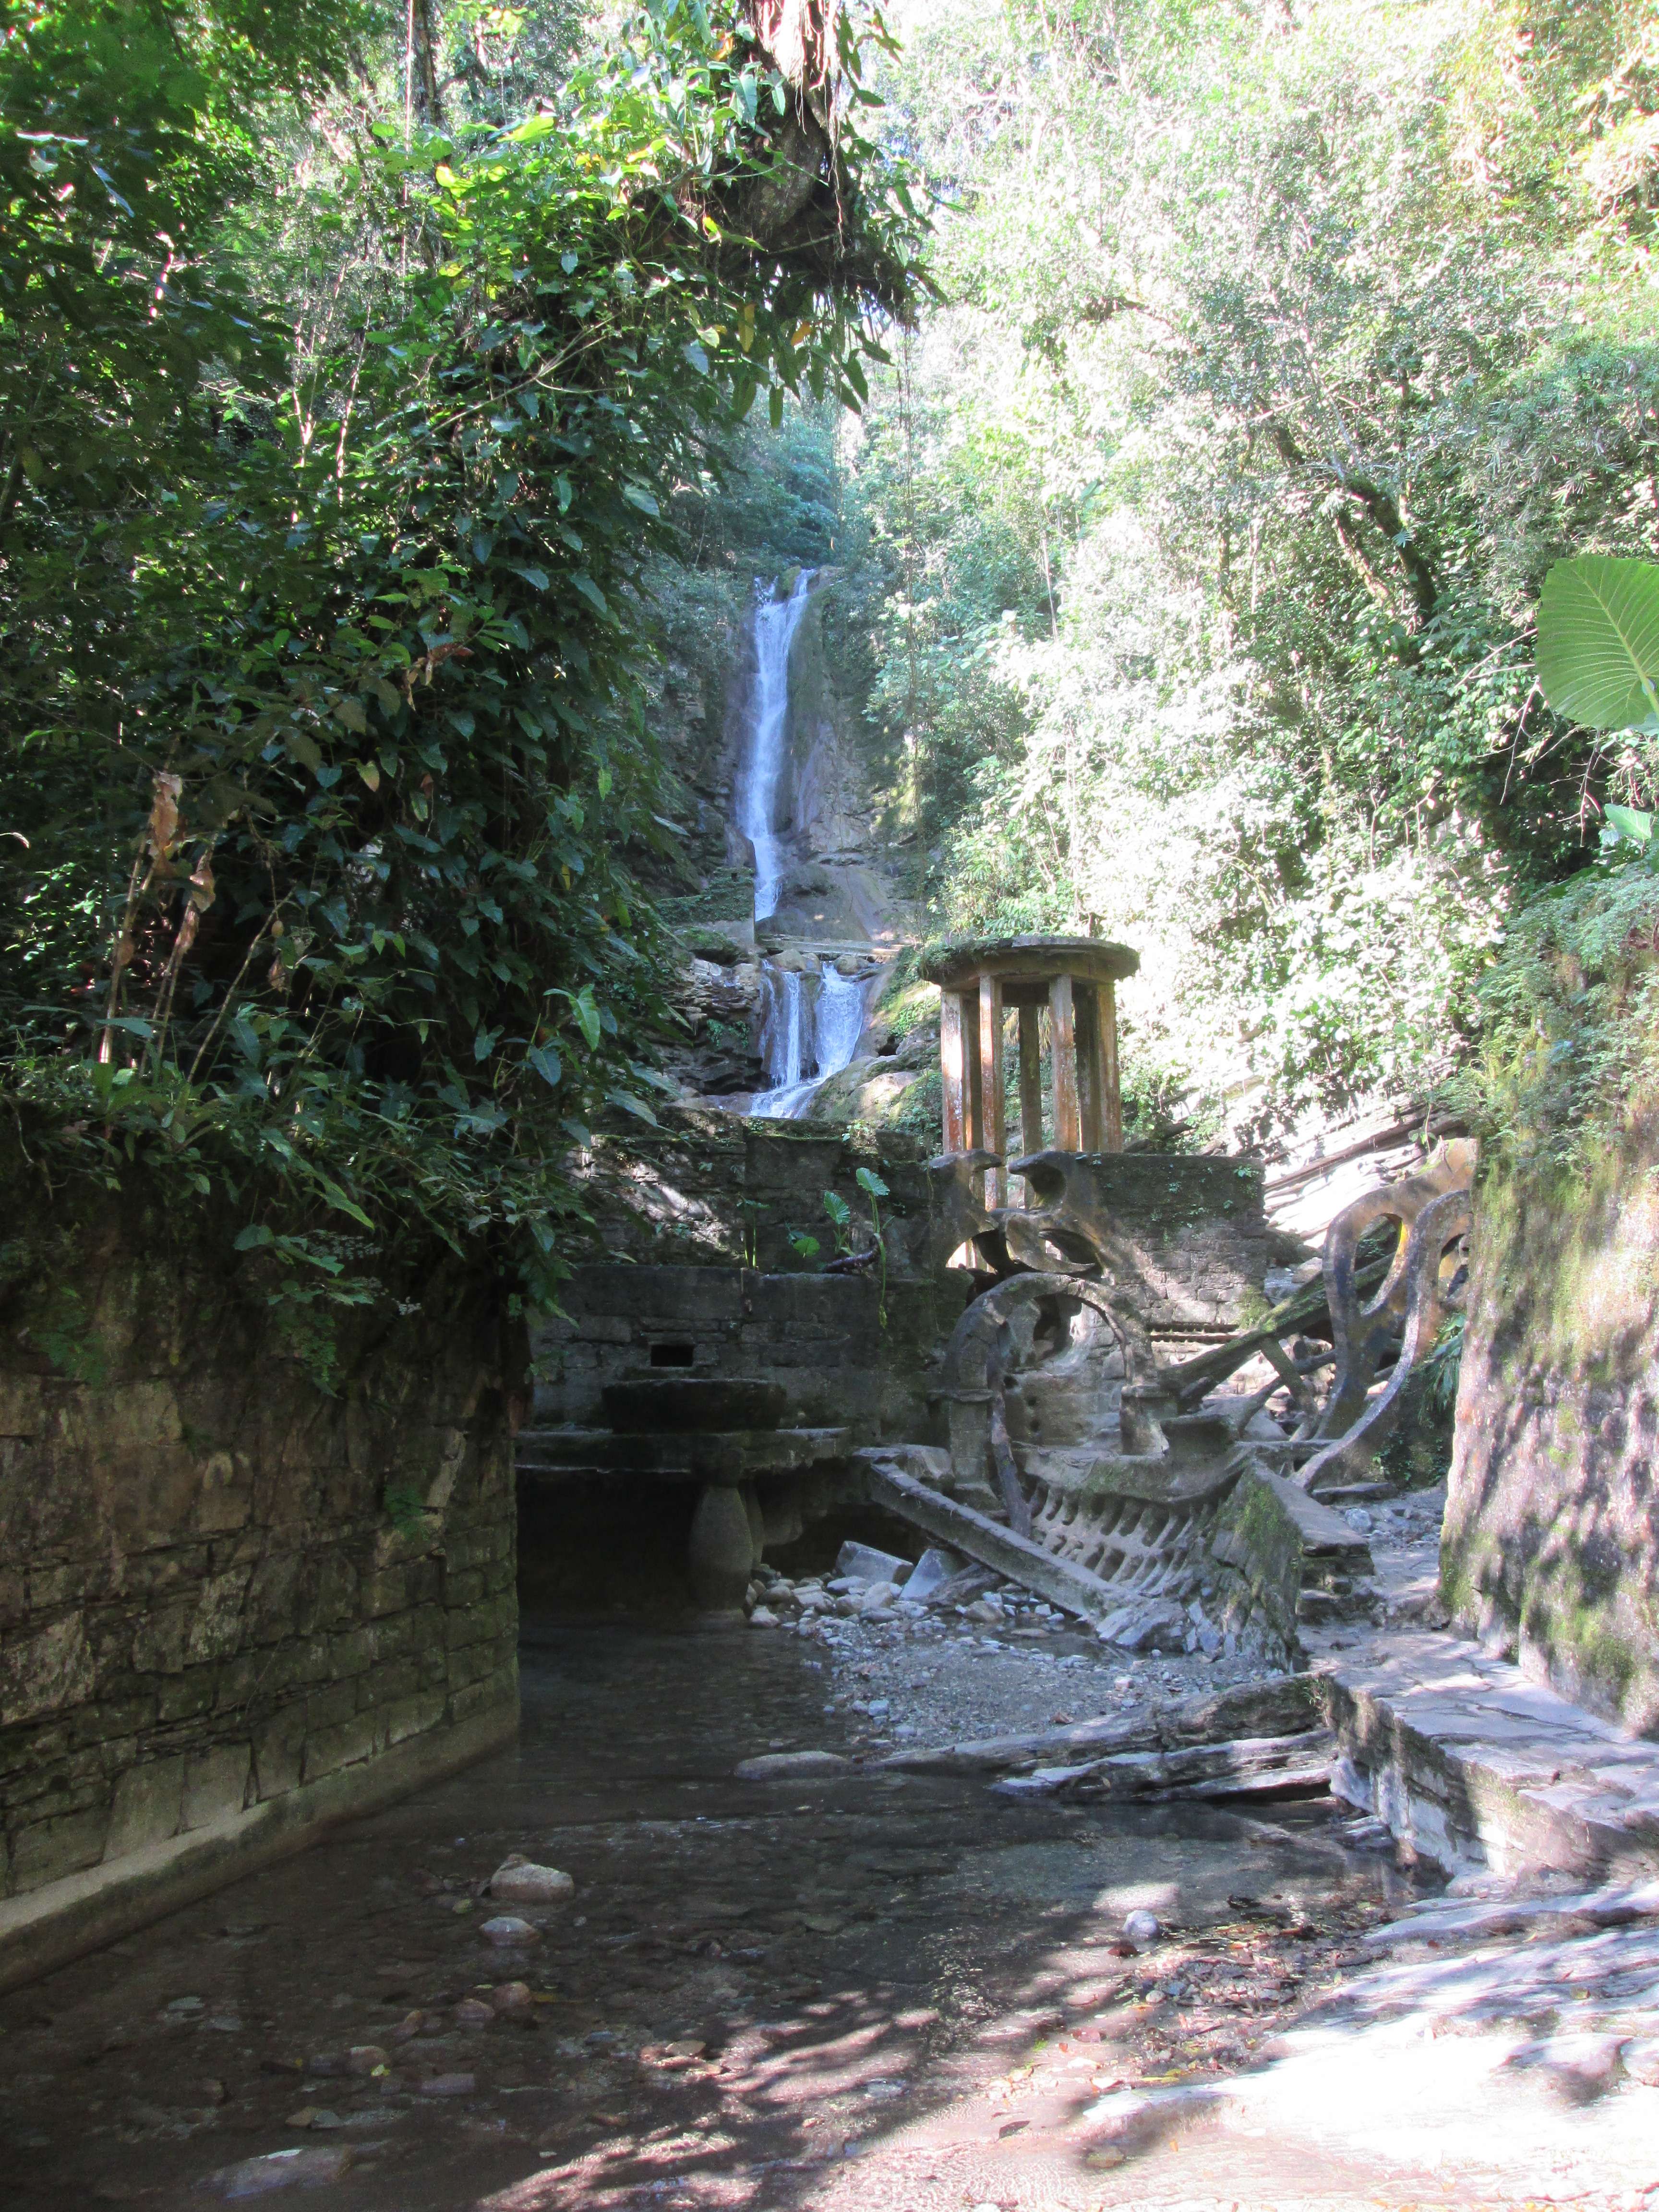 A path alongside a stream, with artificial concrete ruins and a waterfall in the background